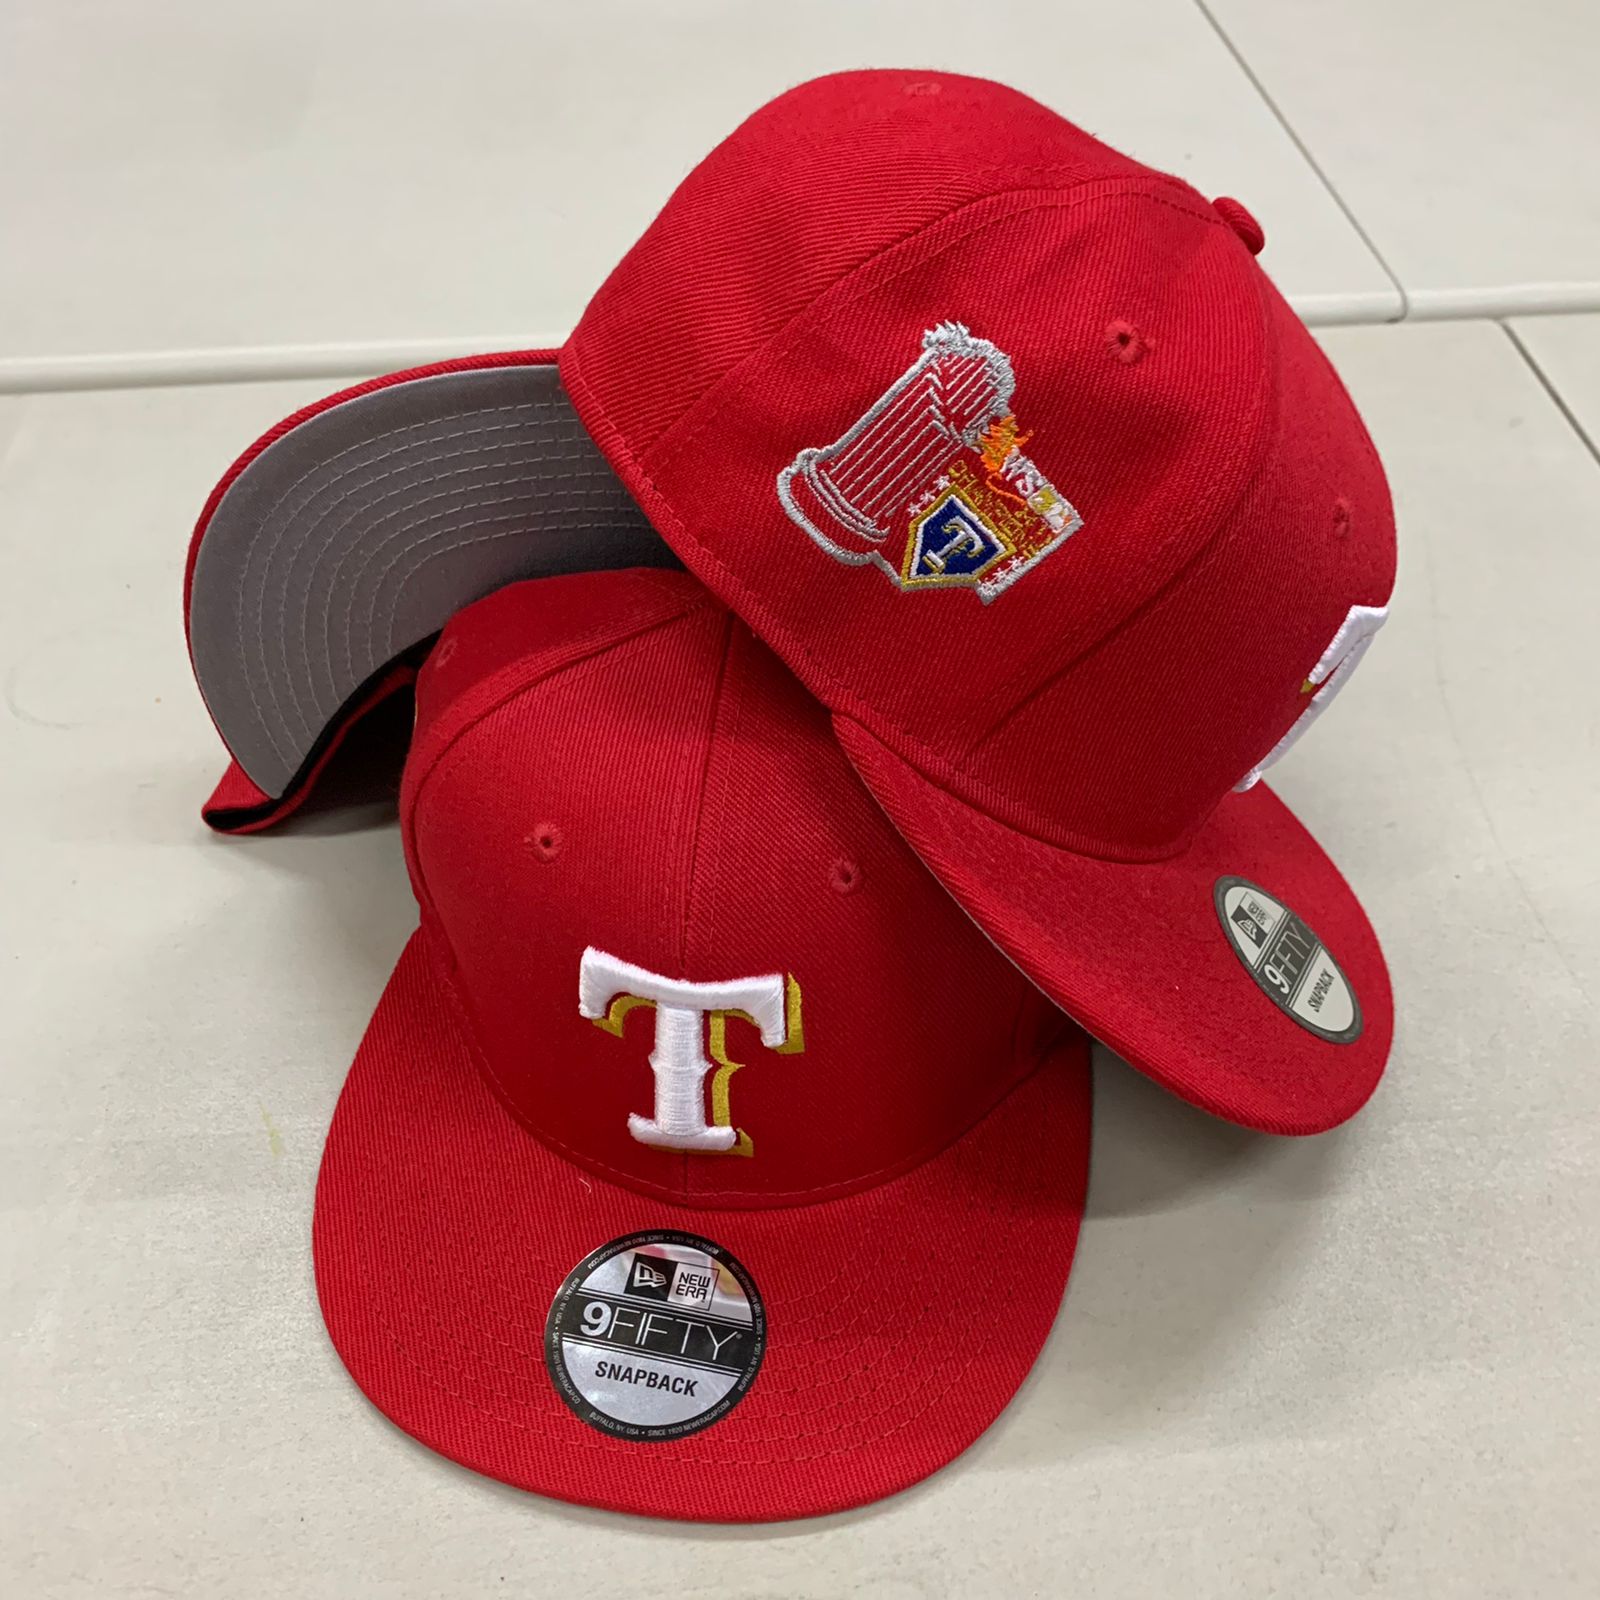 Best Quality Snapback Caps Manufacturer in Bangladesh